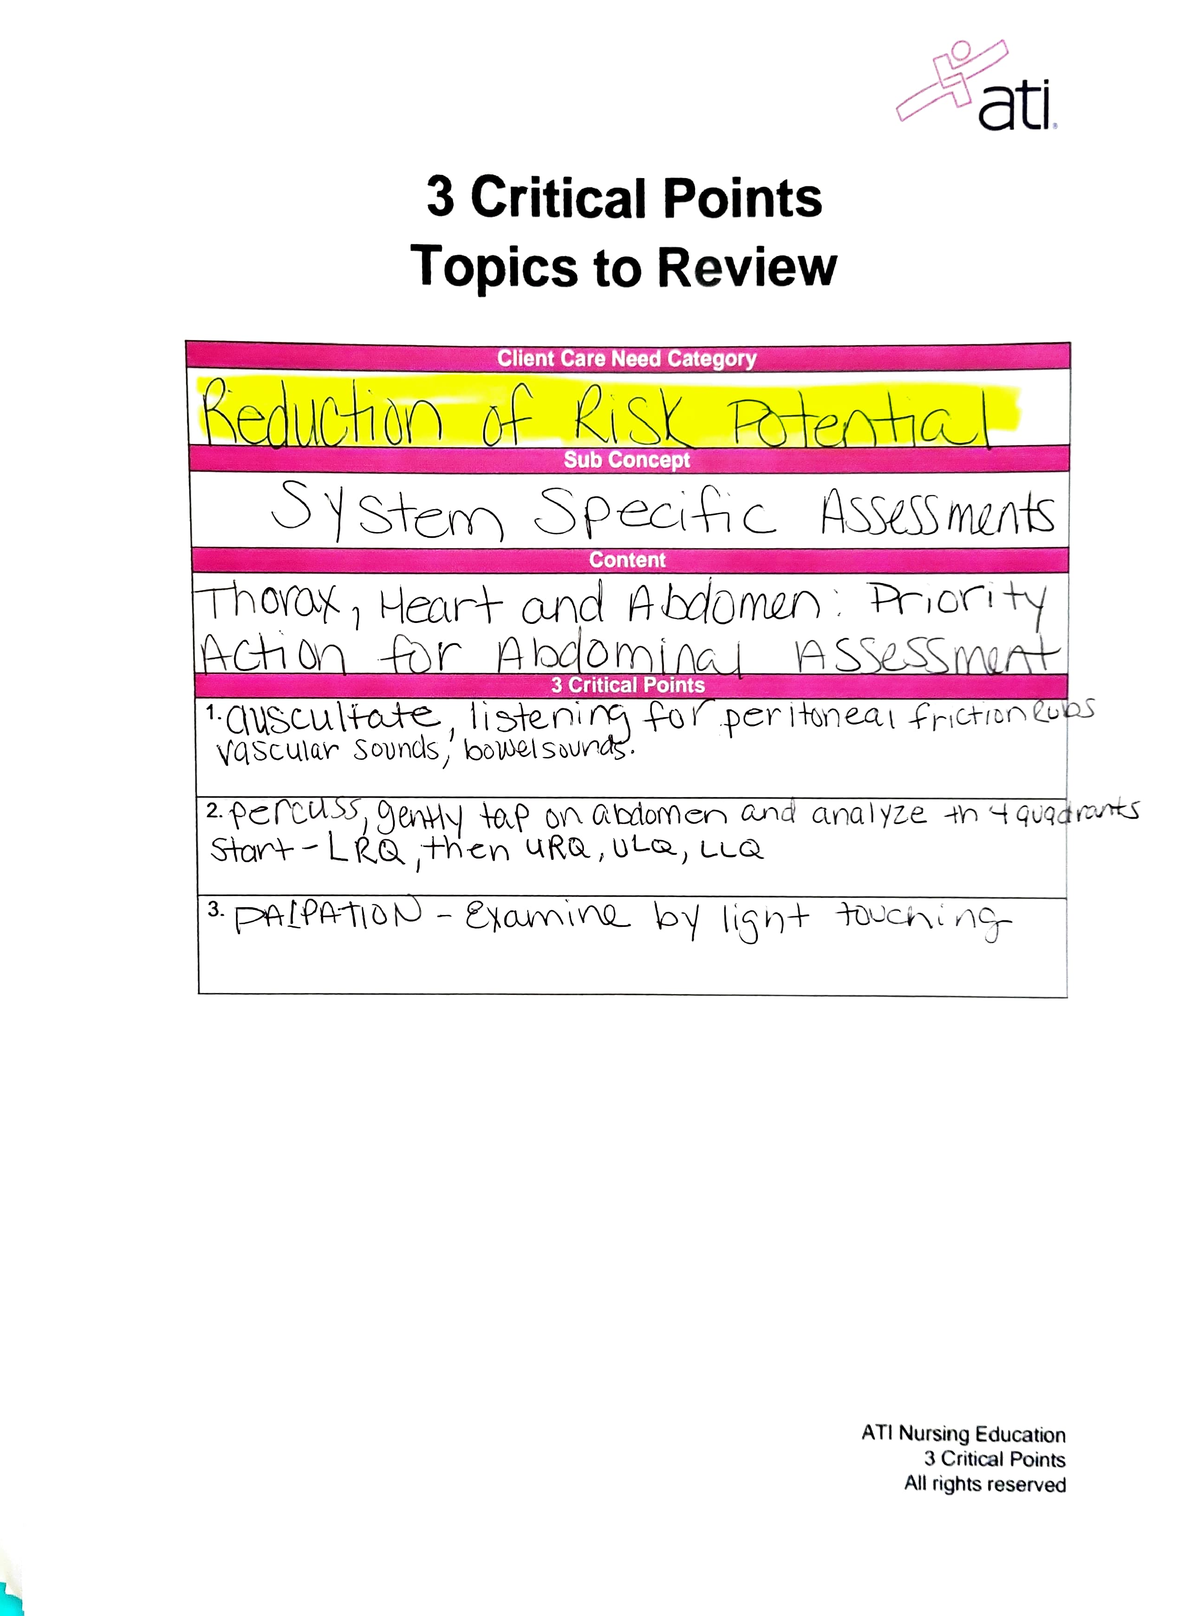 ati-critical-points-at-3-critical-pointss-topics-to-review